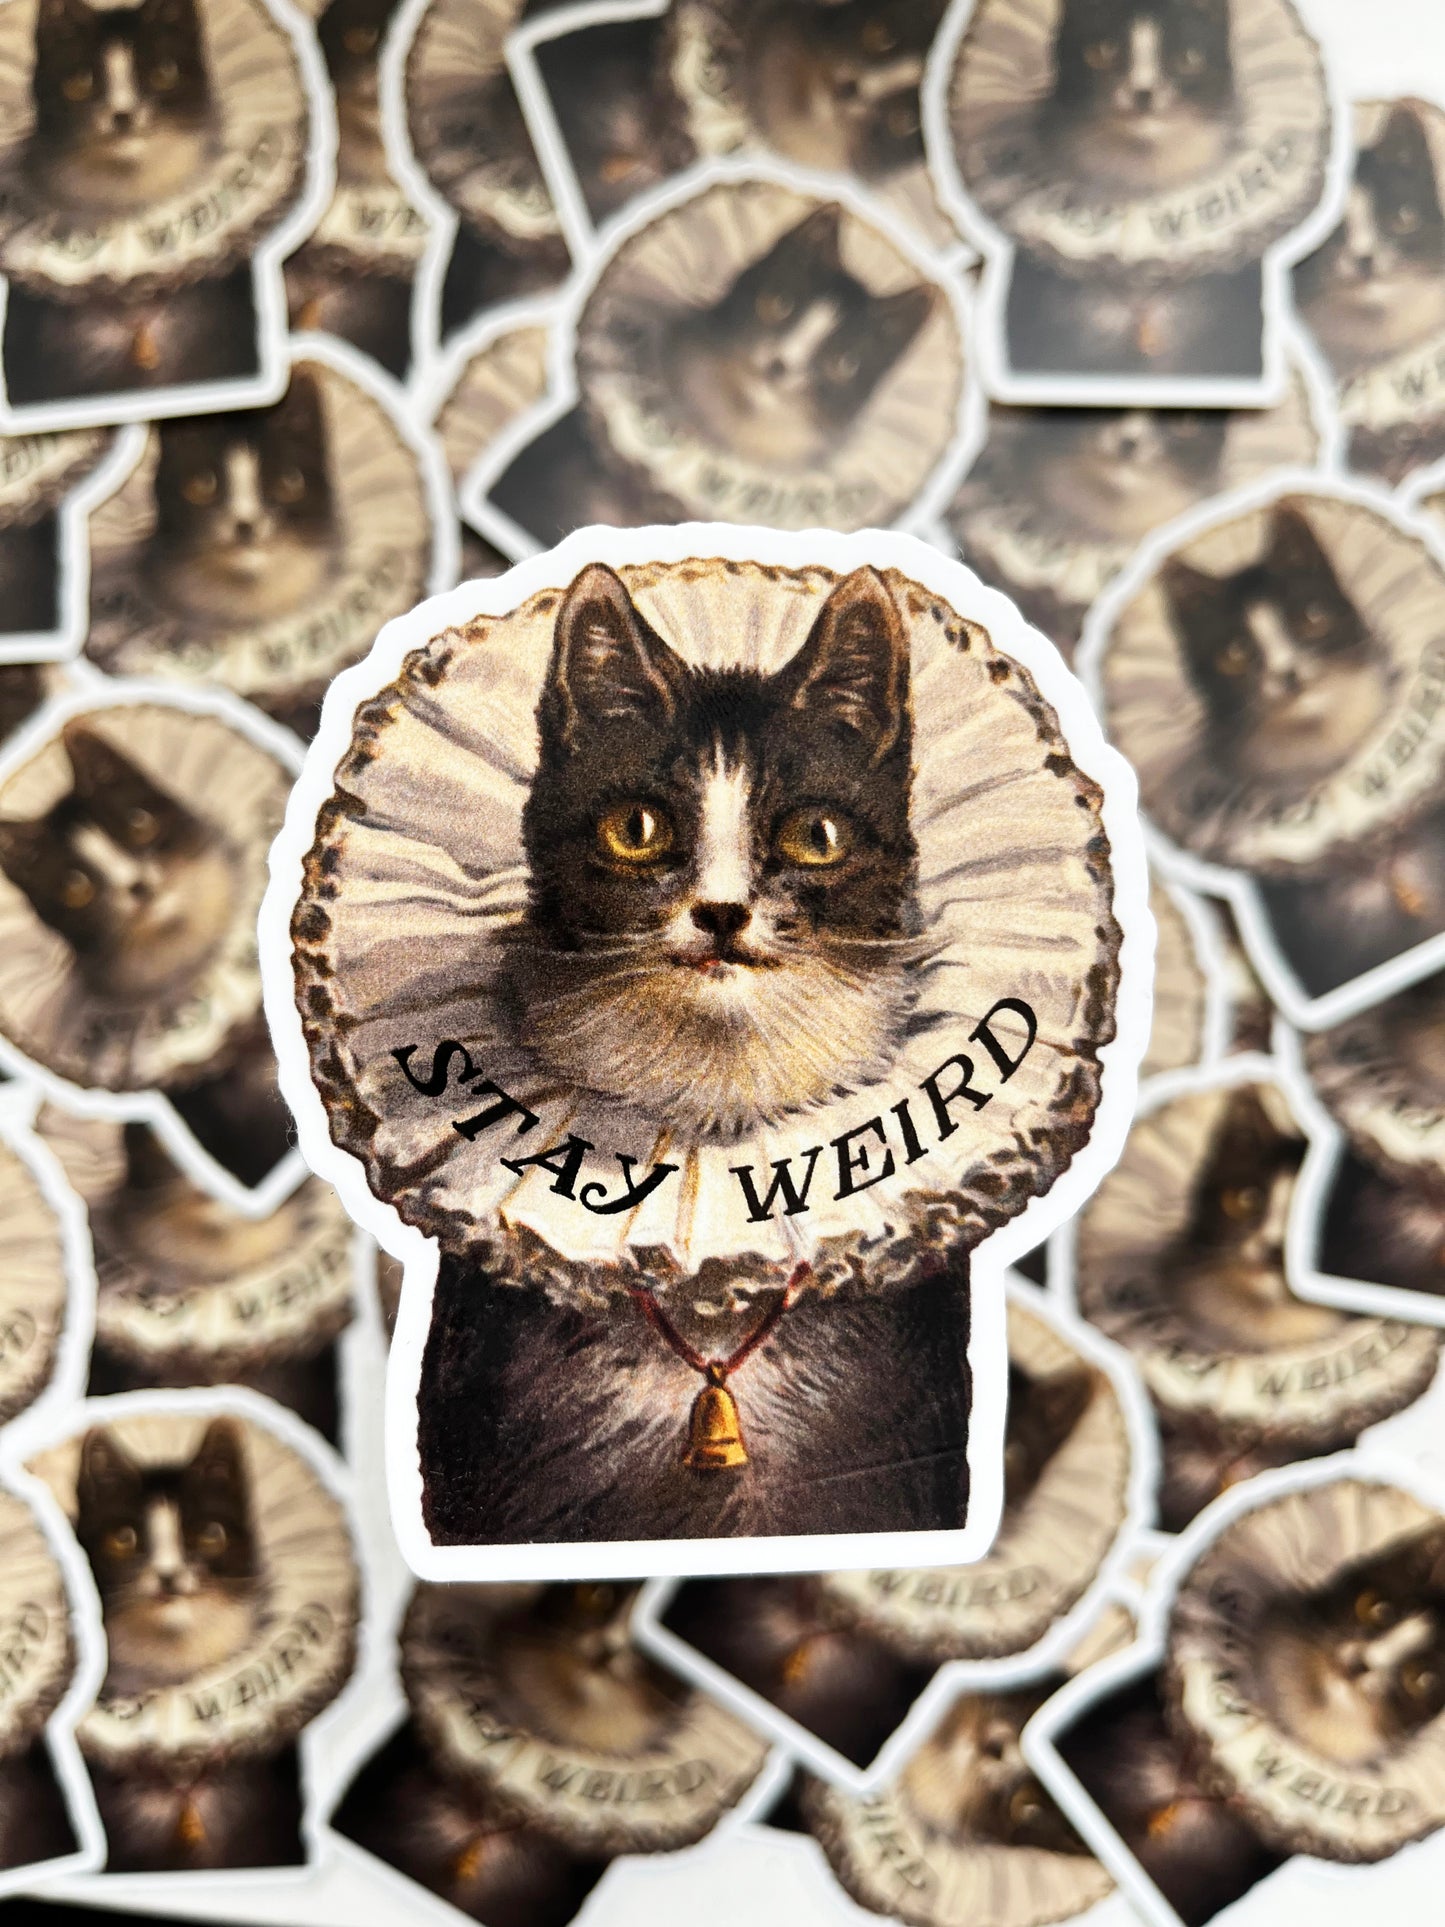 stay weird kitty sticker vintage style cat sticker stay weird funny stickers coin laundry montana